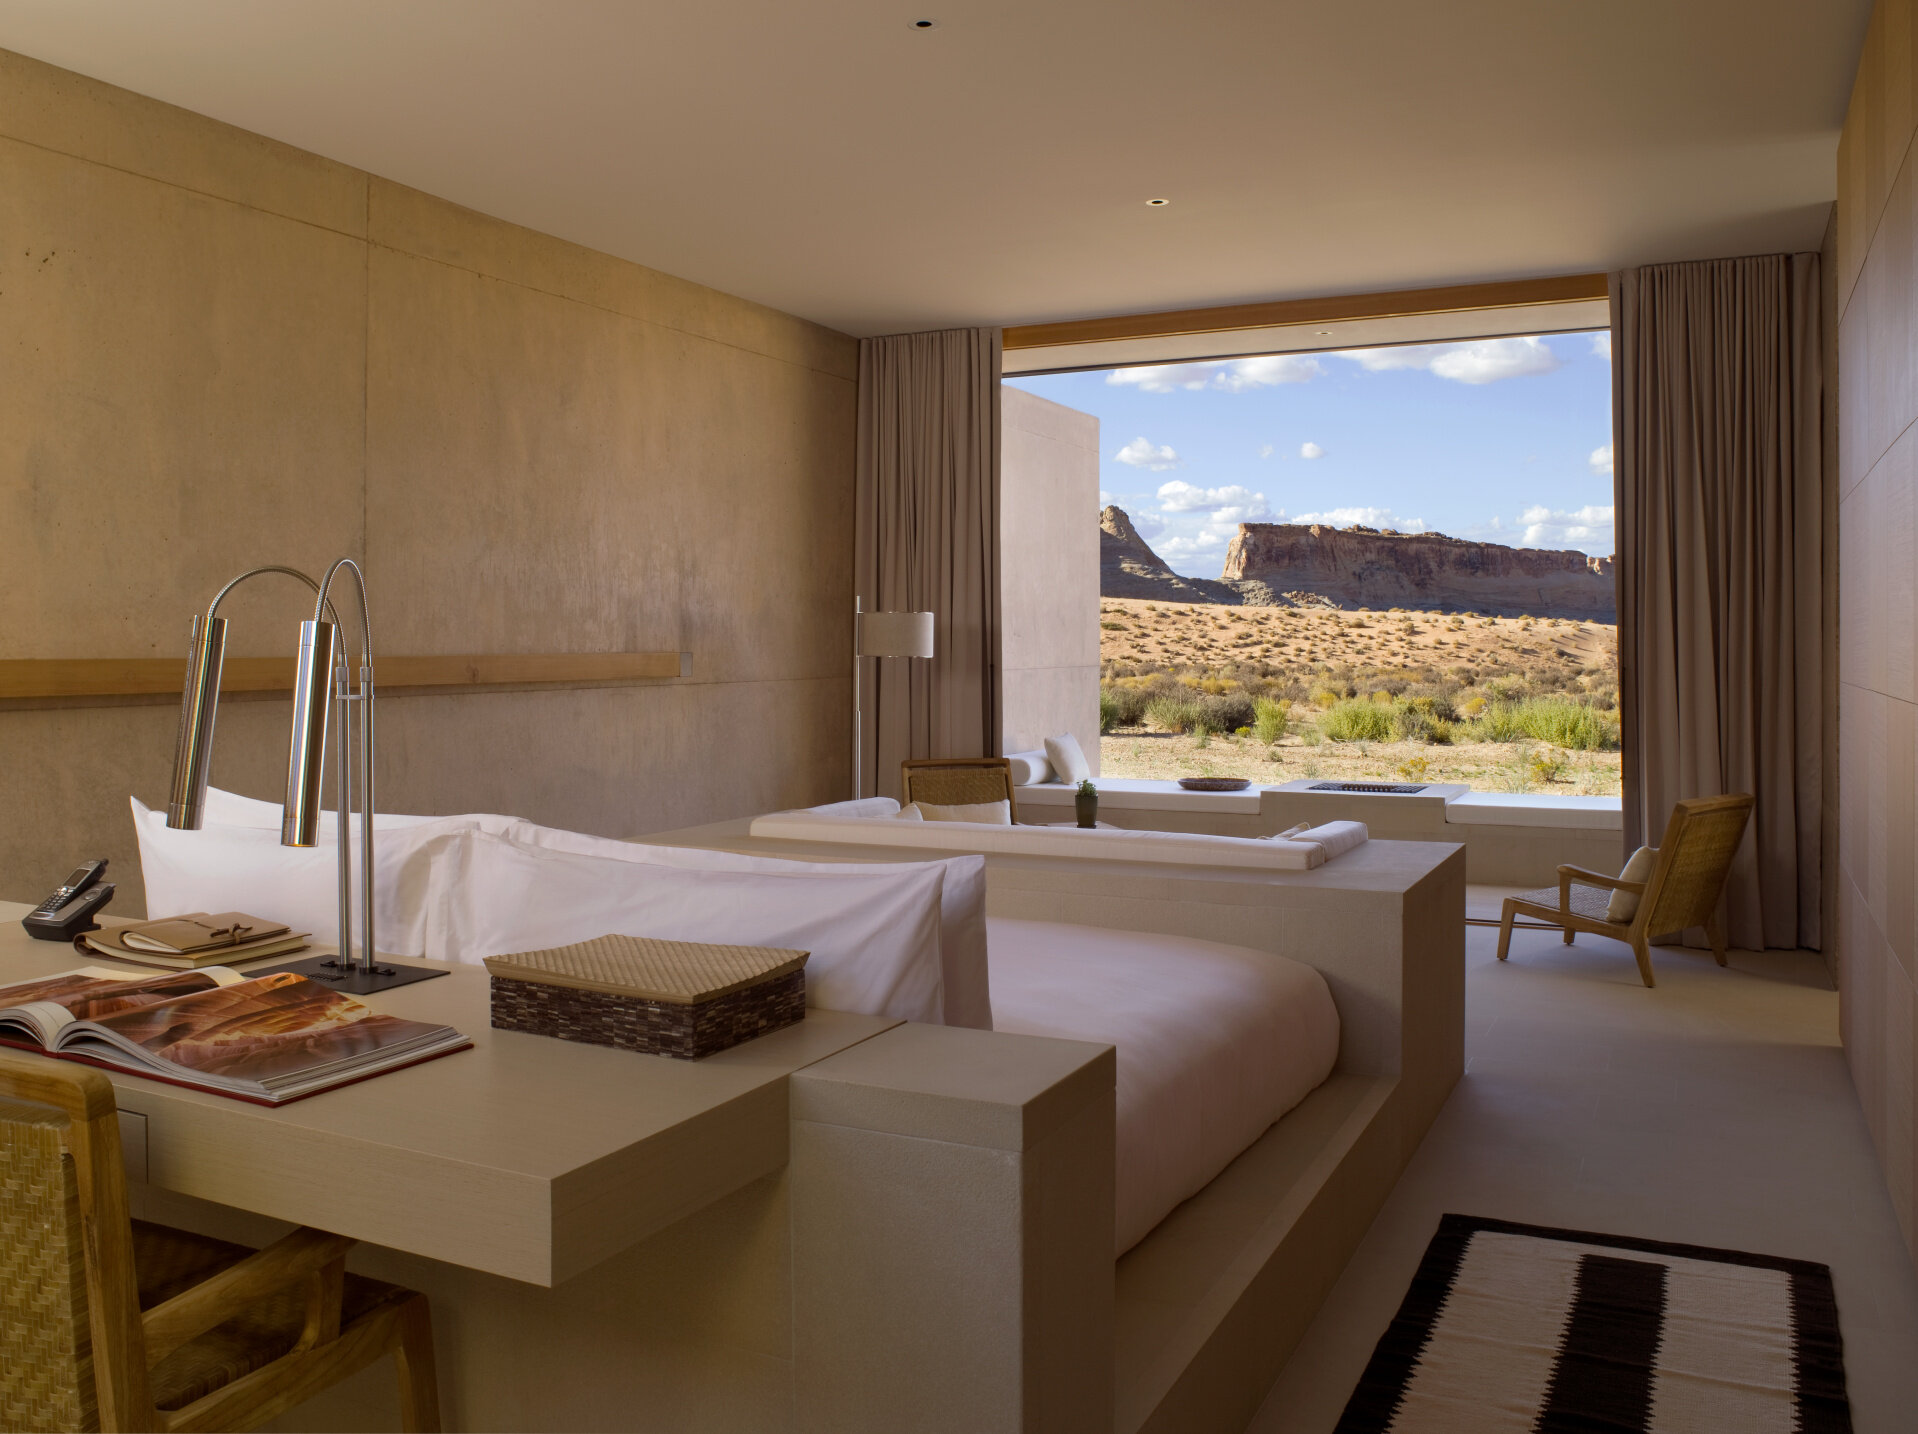   Accommodations in a Desert Suite (photo credit: Aman)  